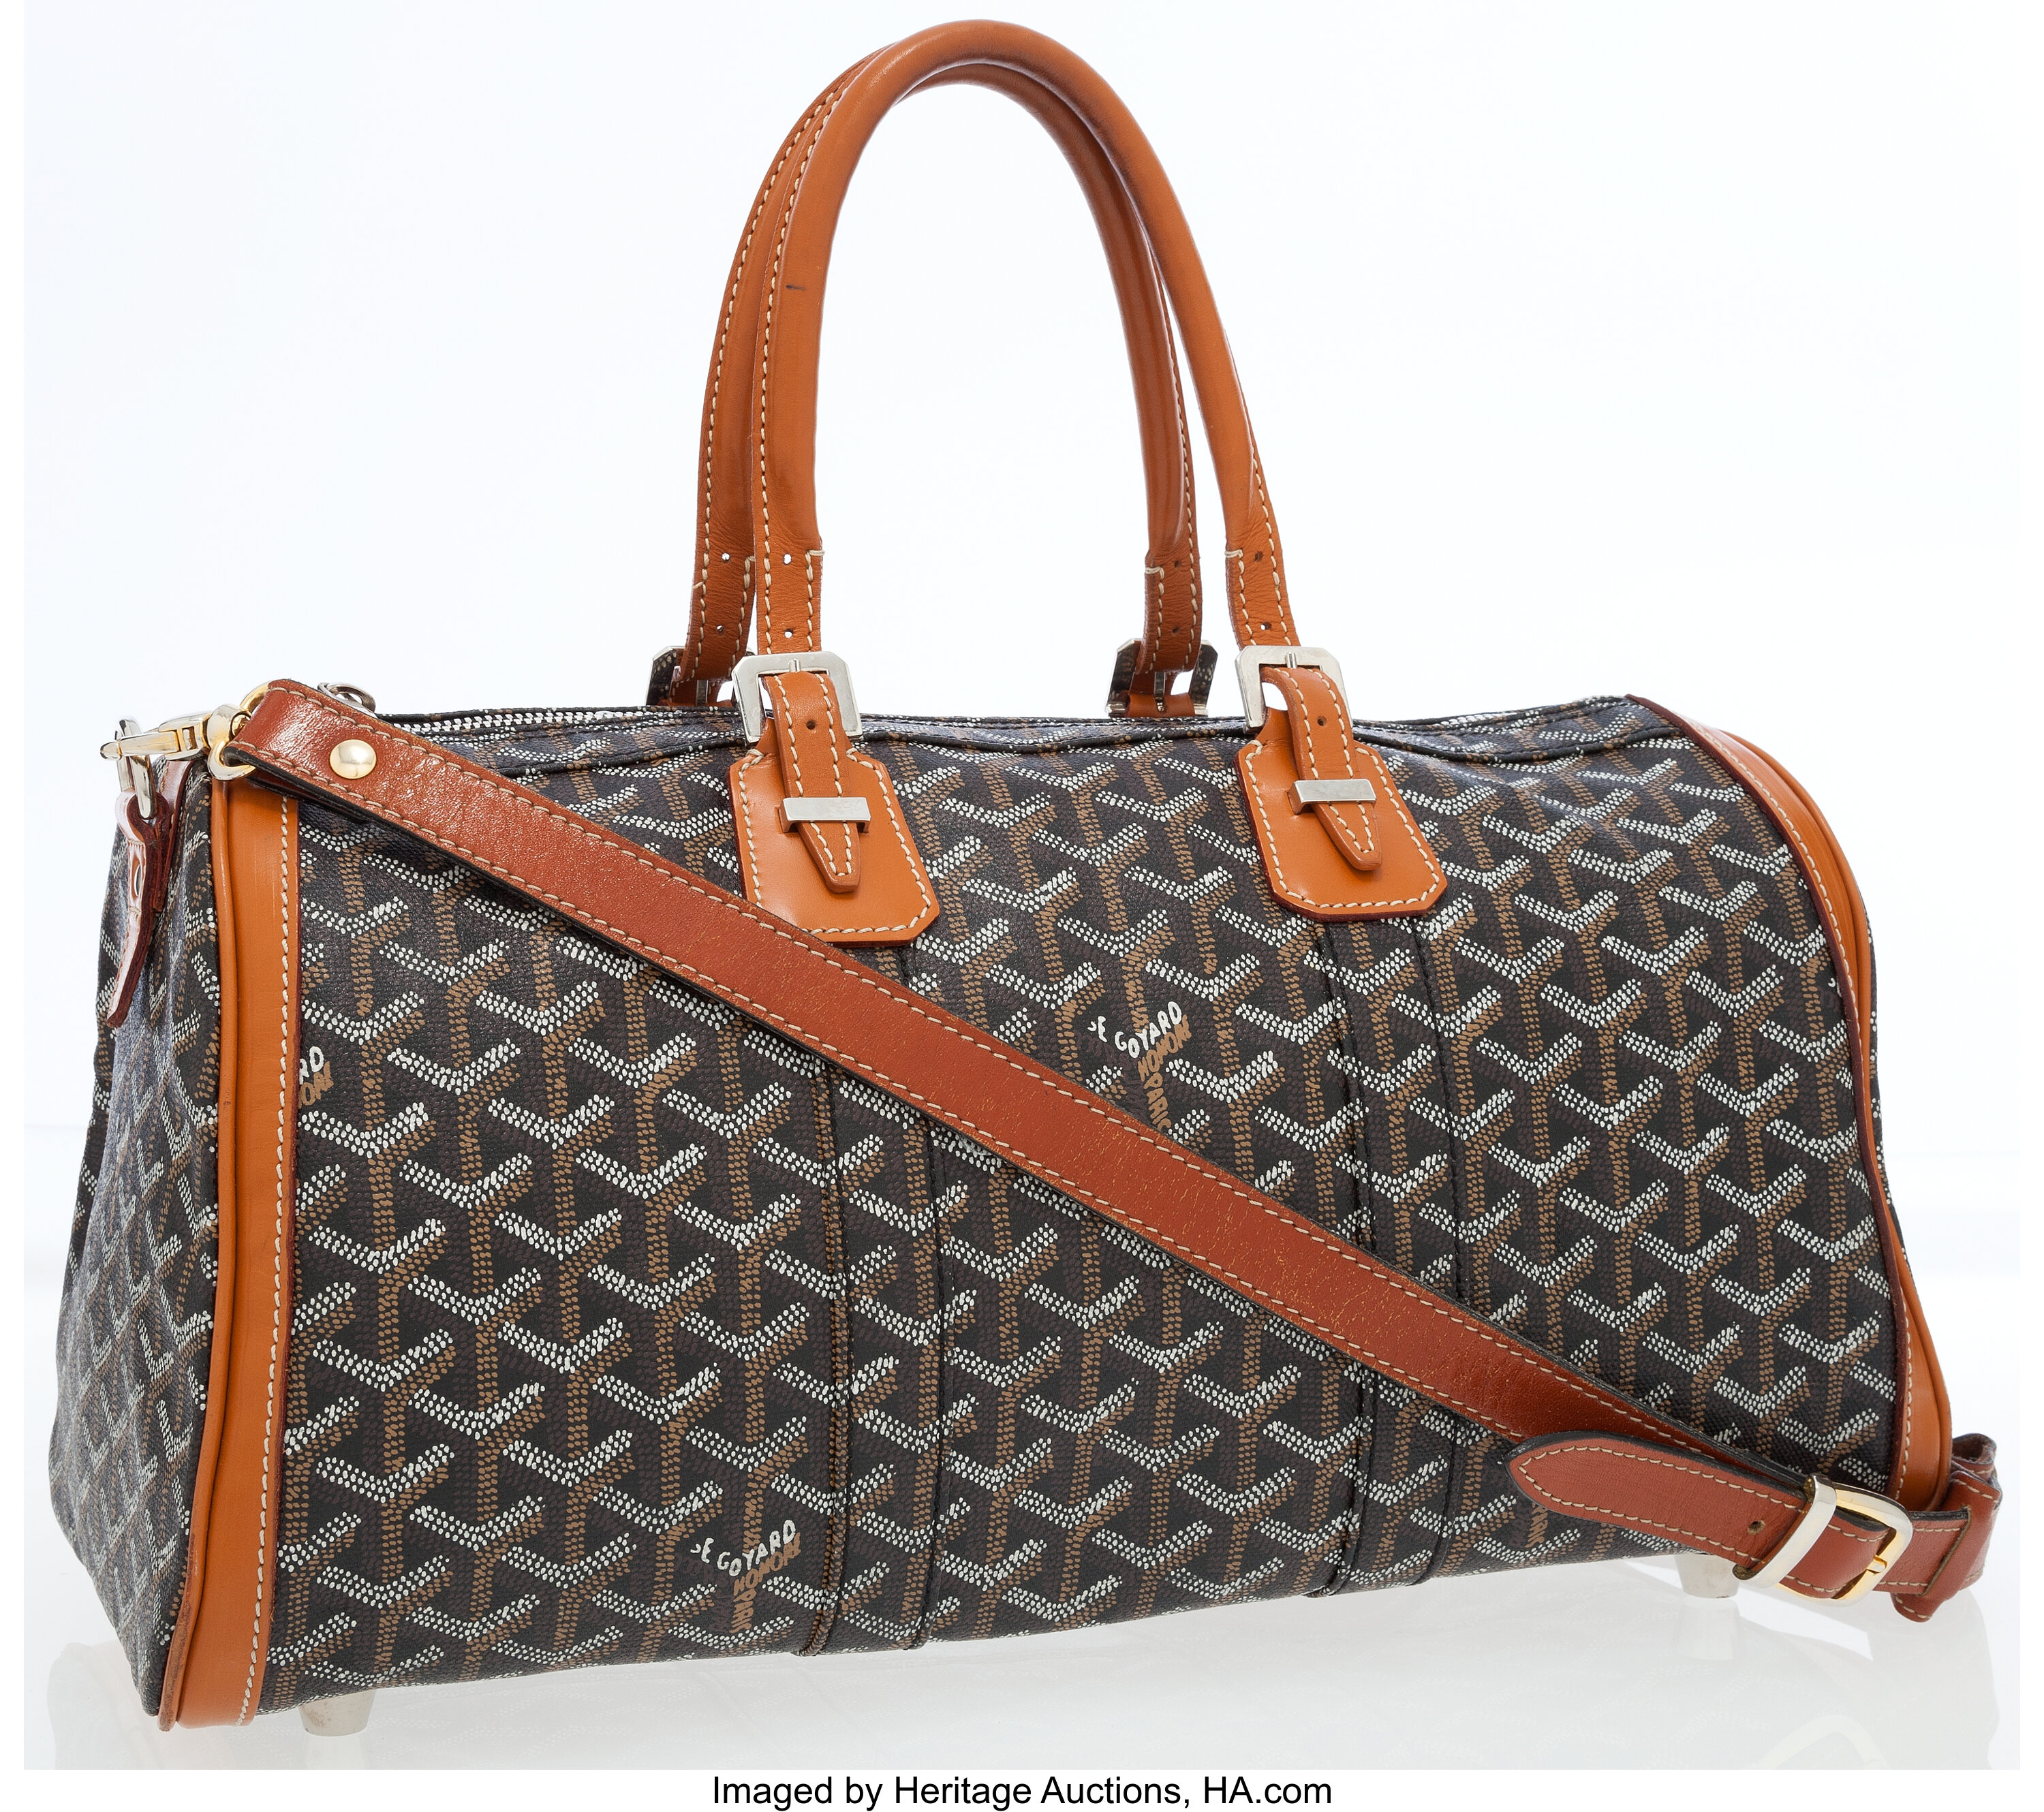 Sold at Auction: GOYARD Suitcase in Goyard canvas, natural leather